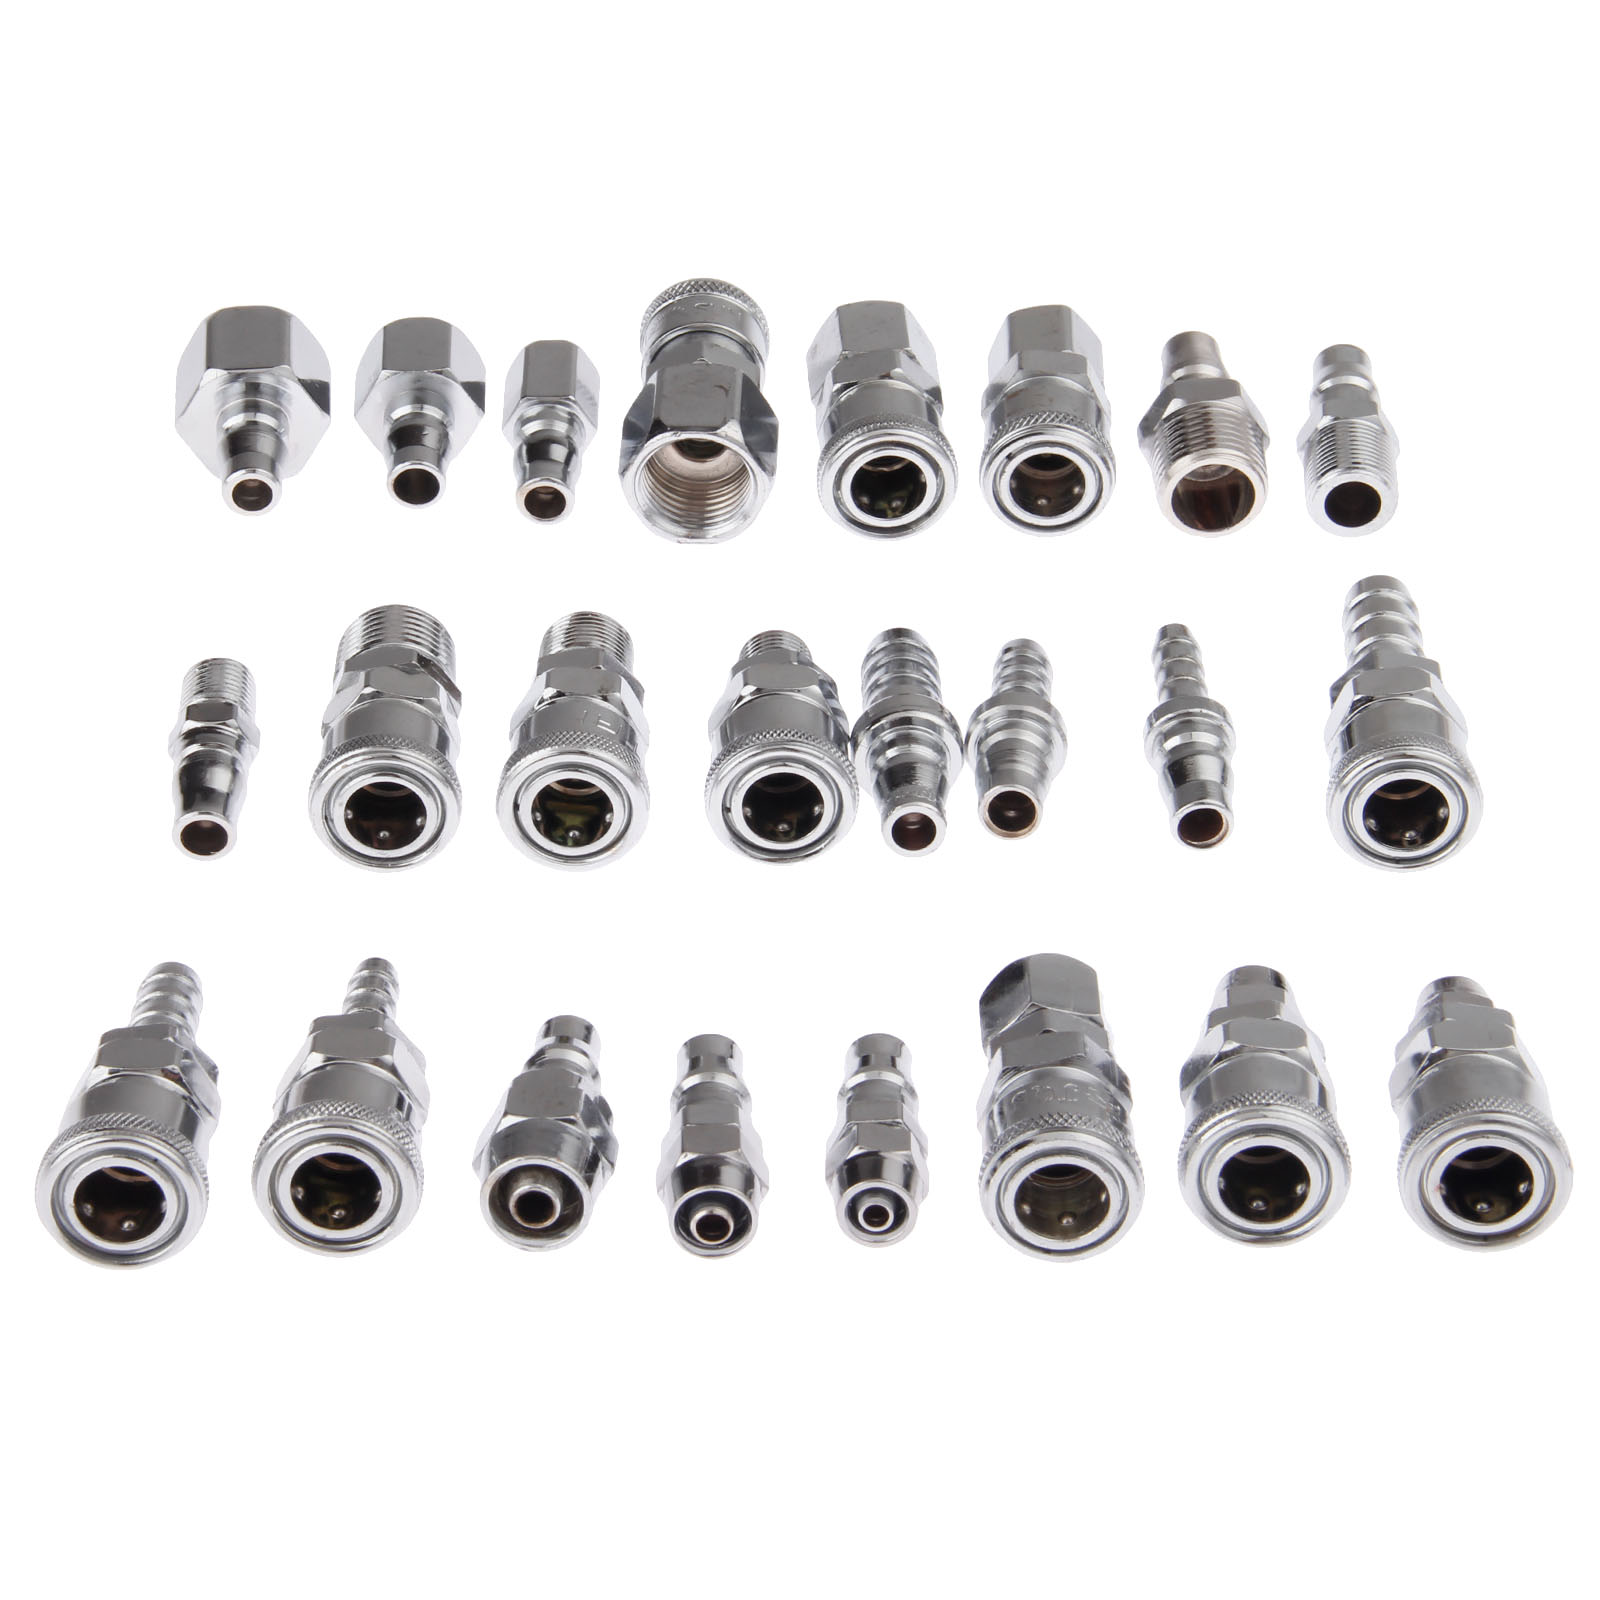 Pneumatic Fittings Female Male Air Line Hose Compressor Fitting Connector Quick Release Coupler Set Pneumatic Parts